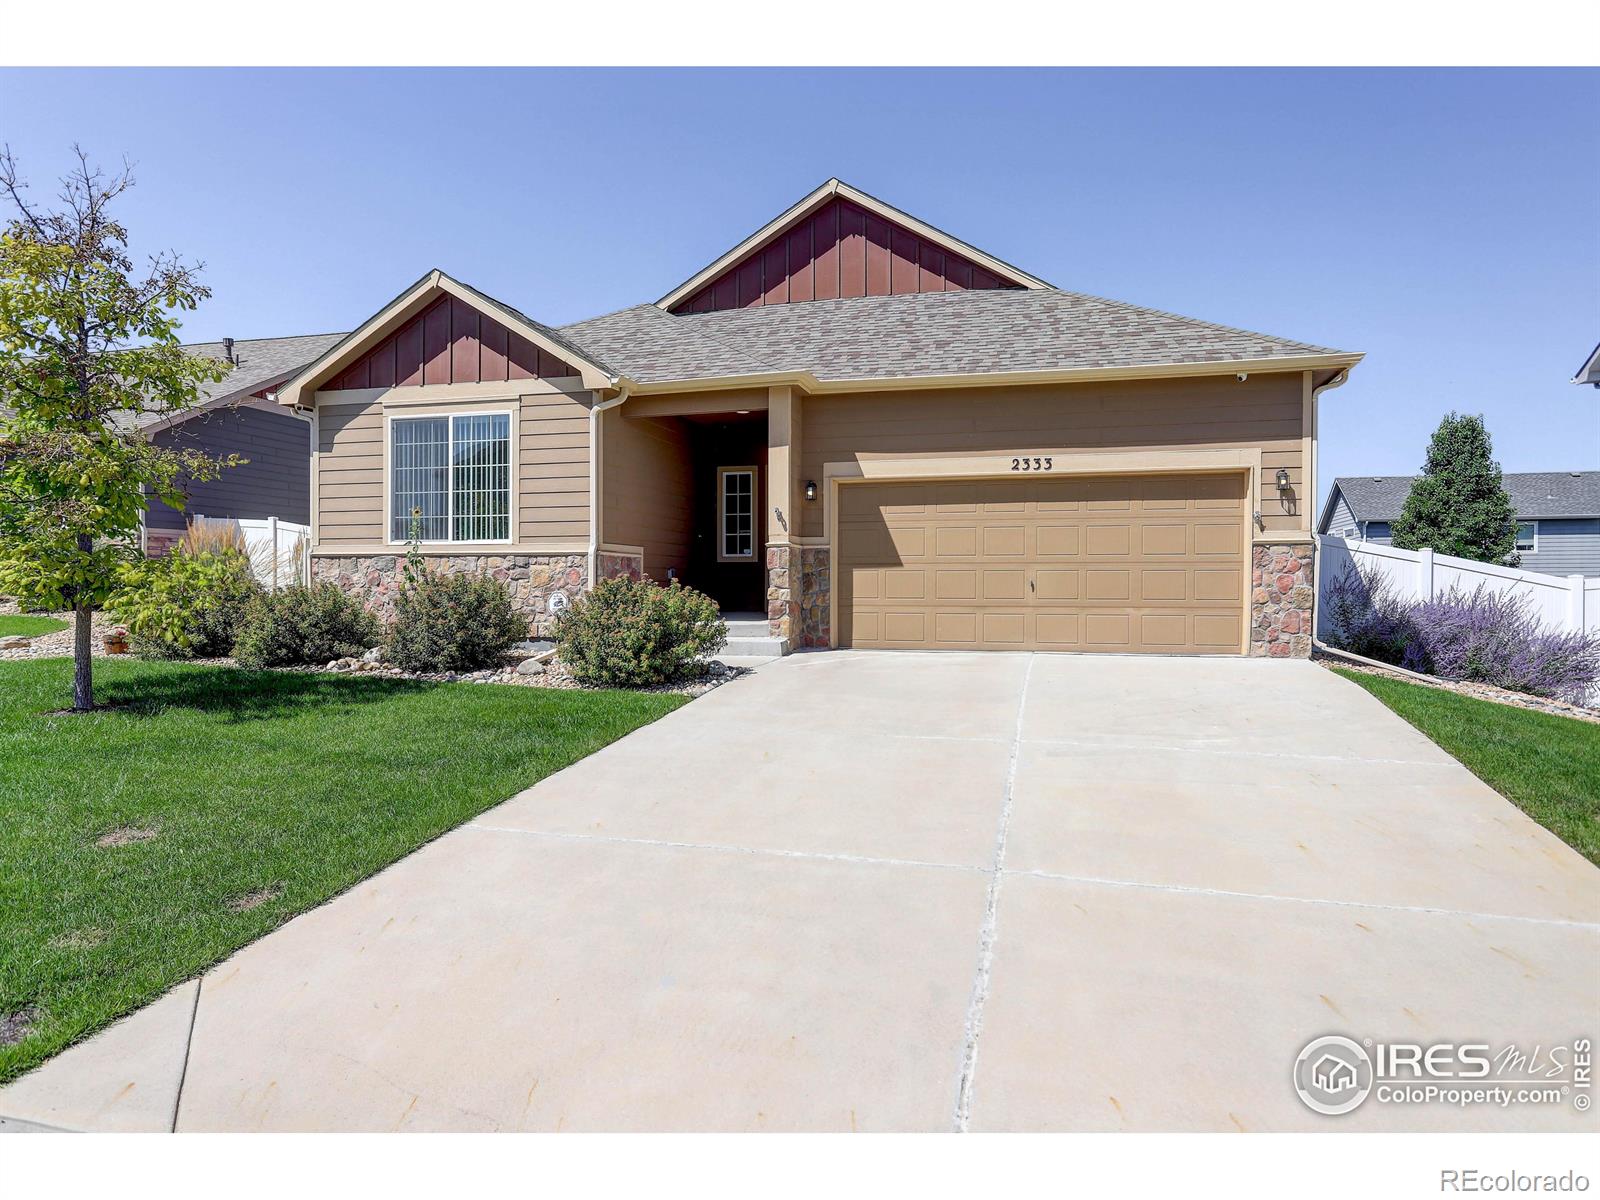 CMA Image for 2333  76th Ave Ct,Greeley, Colorado